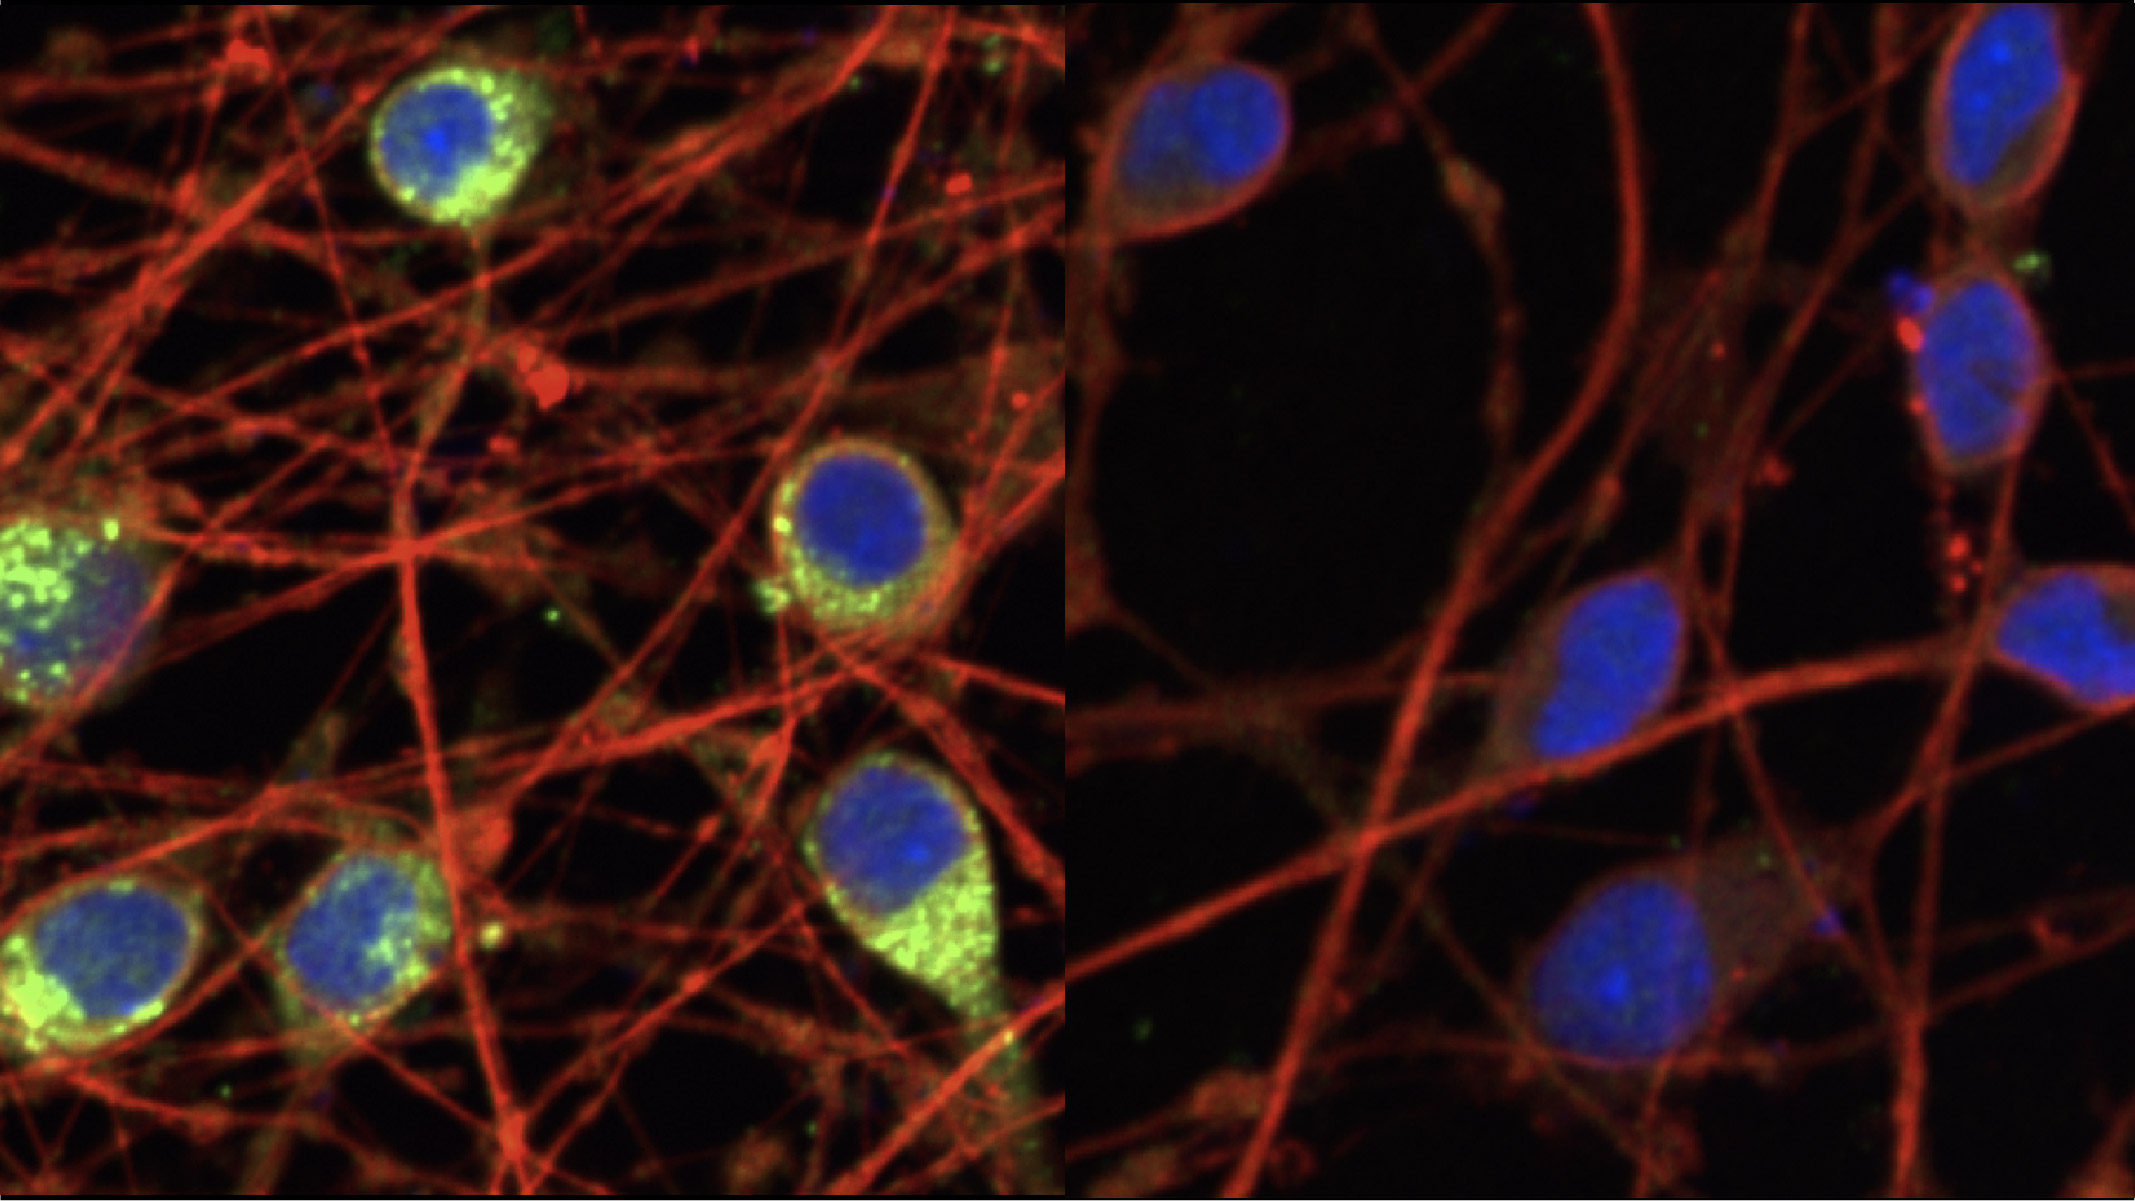 The CRISPR interference technique allows new explorations of human cells. Here, Allen Distinguished Investigator Martin Kampmann, Ph.D., and his colleagues used the method to reduce levels of a dementia-associated protein known as progranulin, shown in green on the left, in human neurons by dialing down the progranulin gene in the cells on the right. (Image adapted from Tian et al (2019) Neuron 104:239)